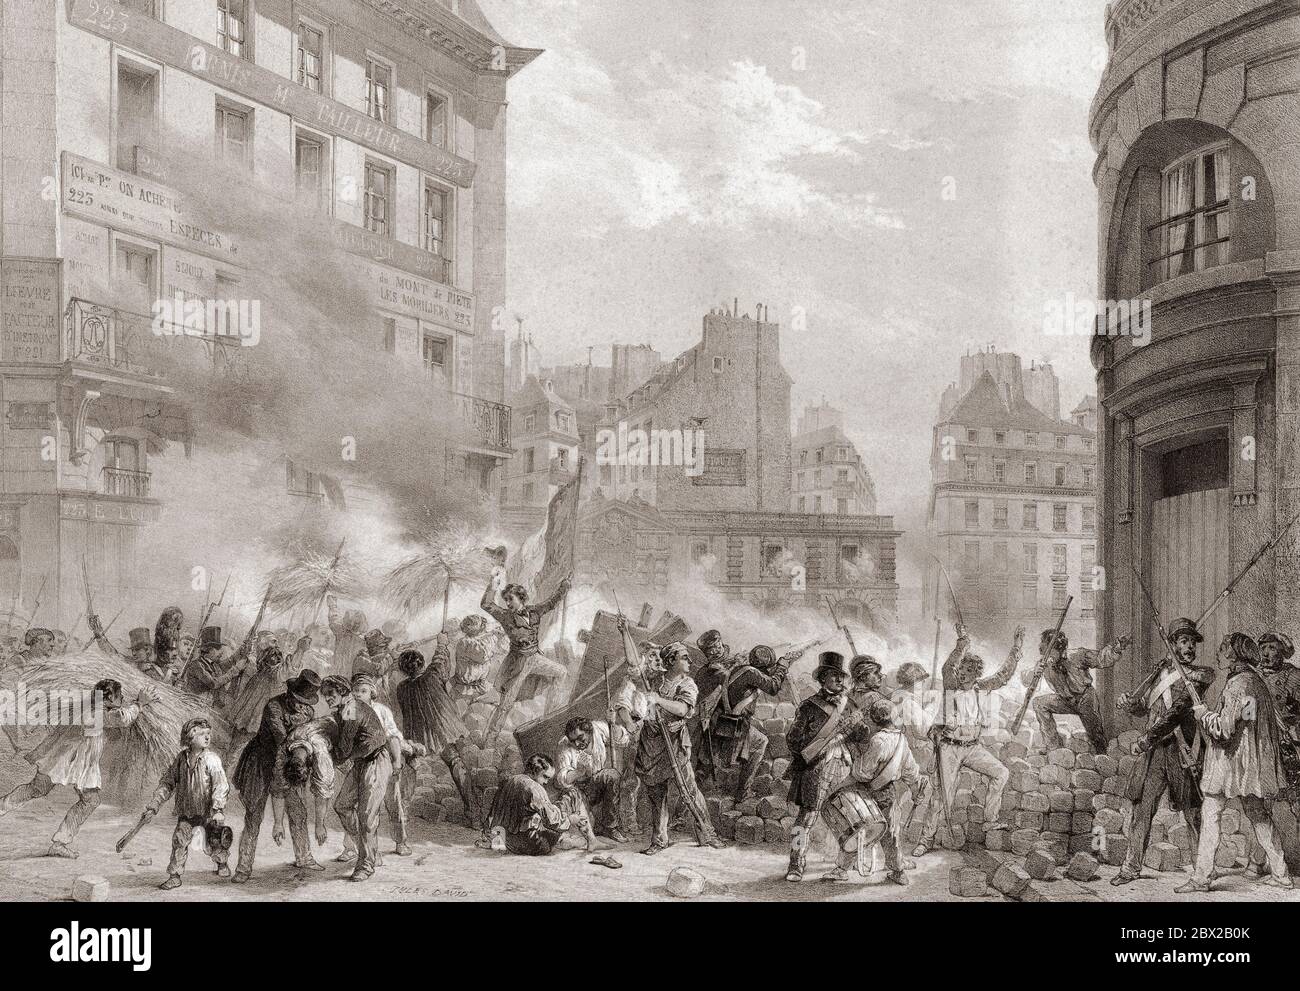 The 1848 Revolution, or February Revolution, France.  Revolutionaries besiege the Chateau d'eau in the Place du Palais-Royal.  After a contemporary print by Jules David. Stock Photo